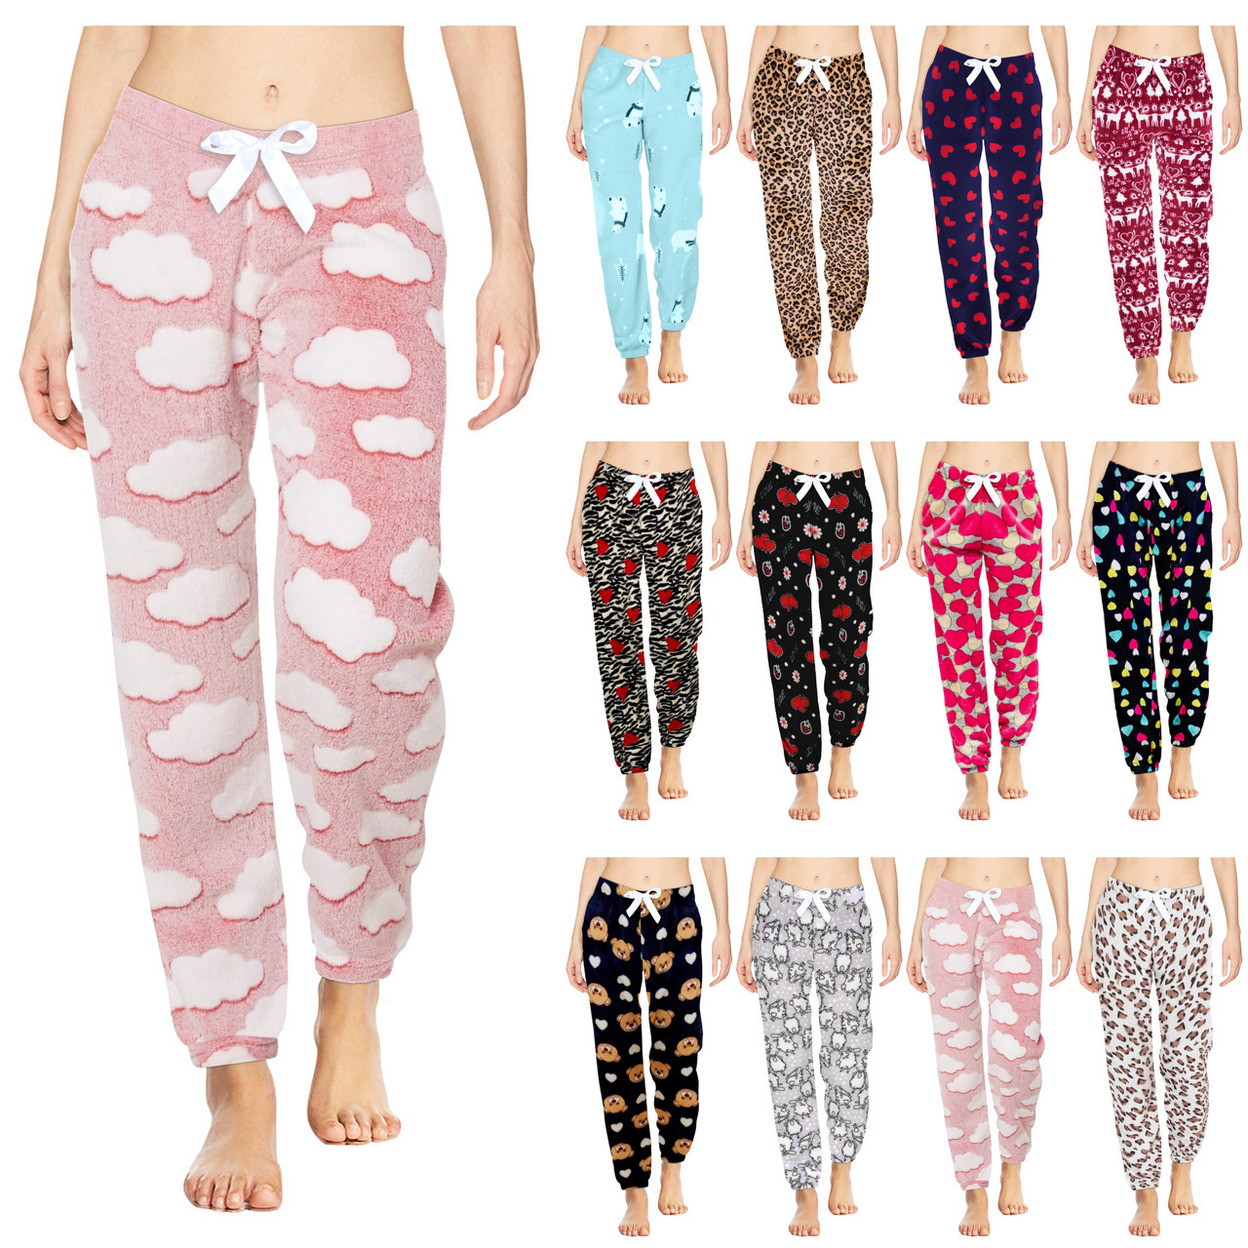 Multi-Pack: Women's Printed Ultra-Soft Comfy Stretch Micro-Fleece Pajama Lounge Pants - 3-pack, Shapes, Large